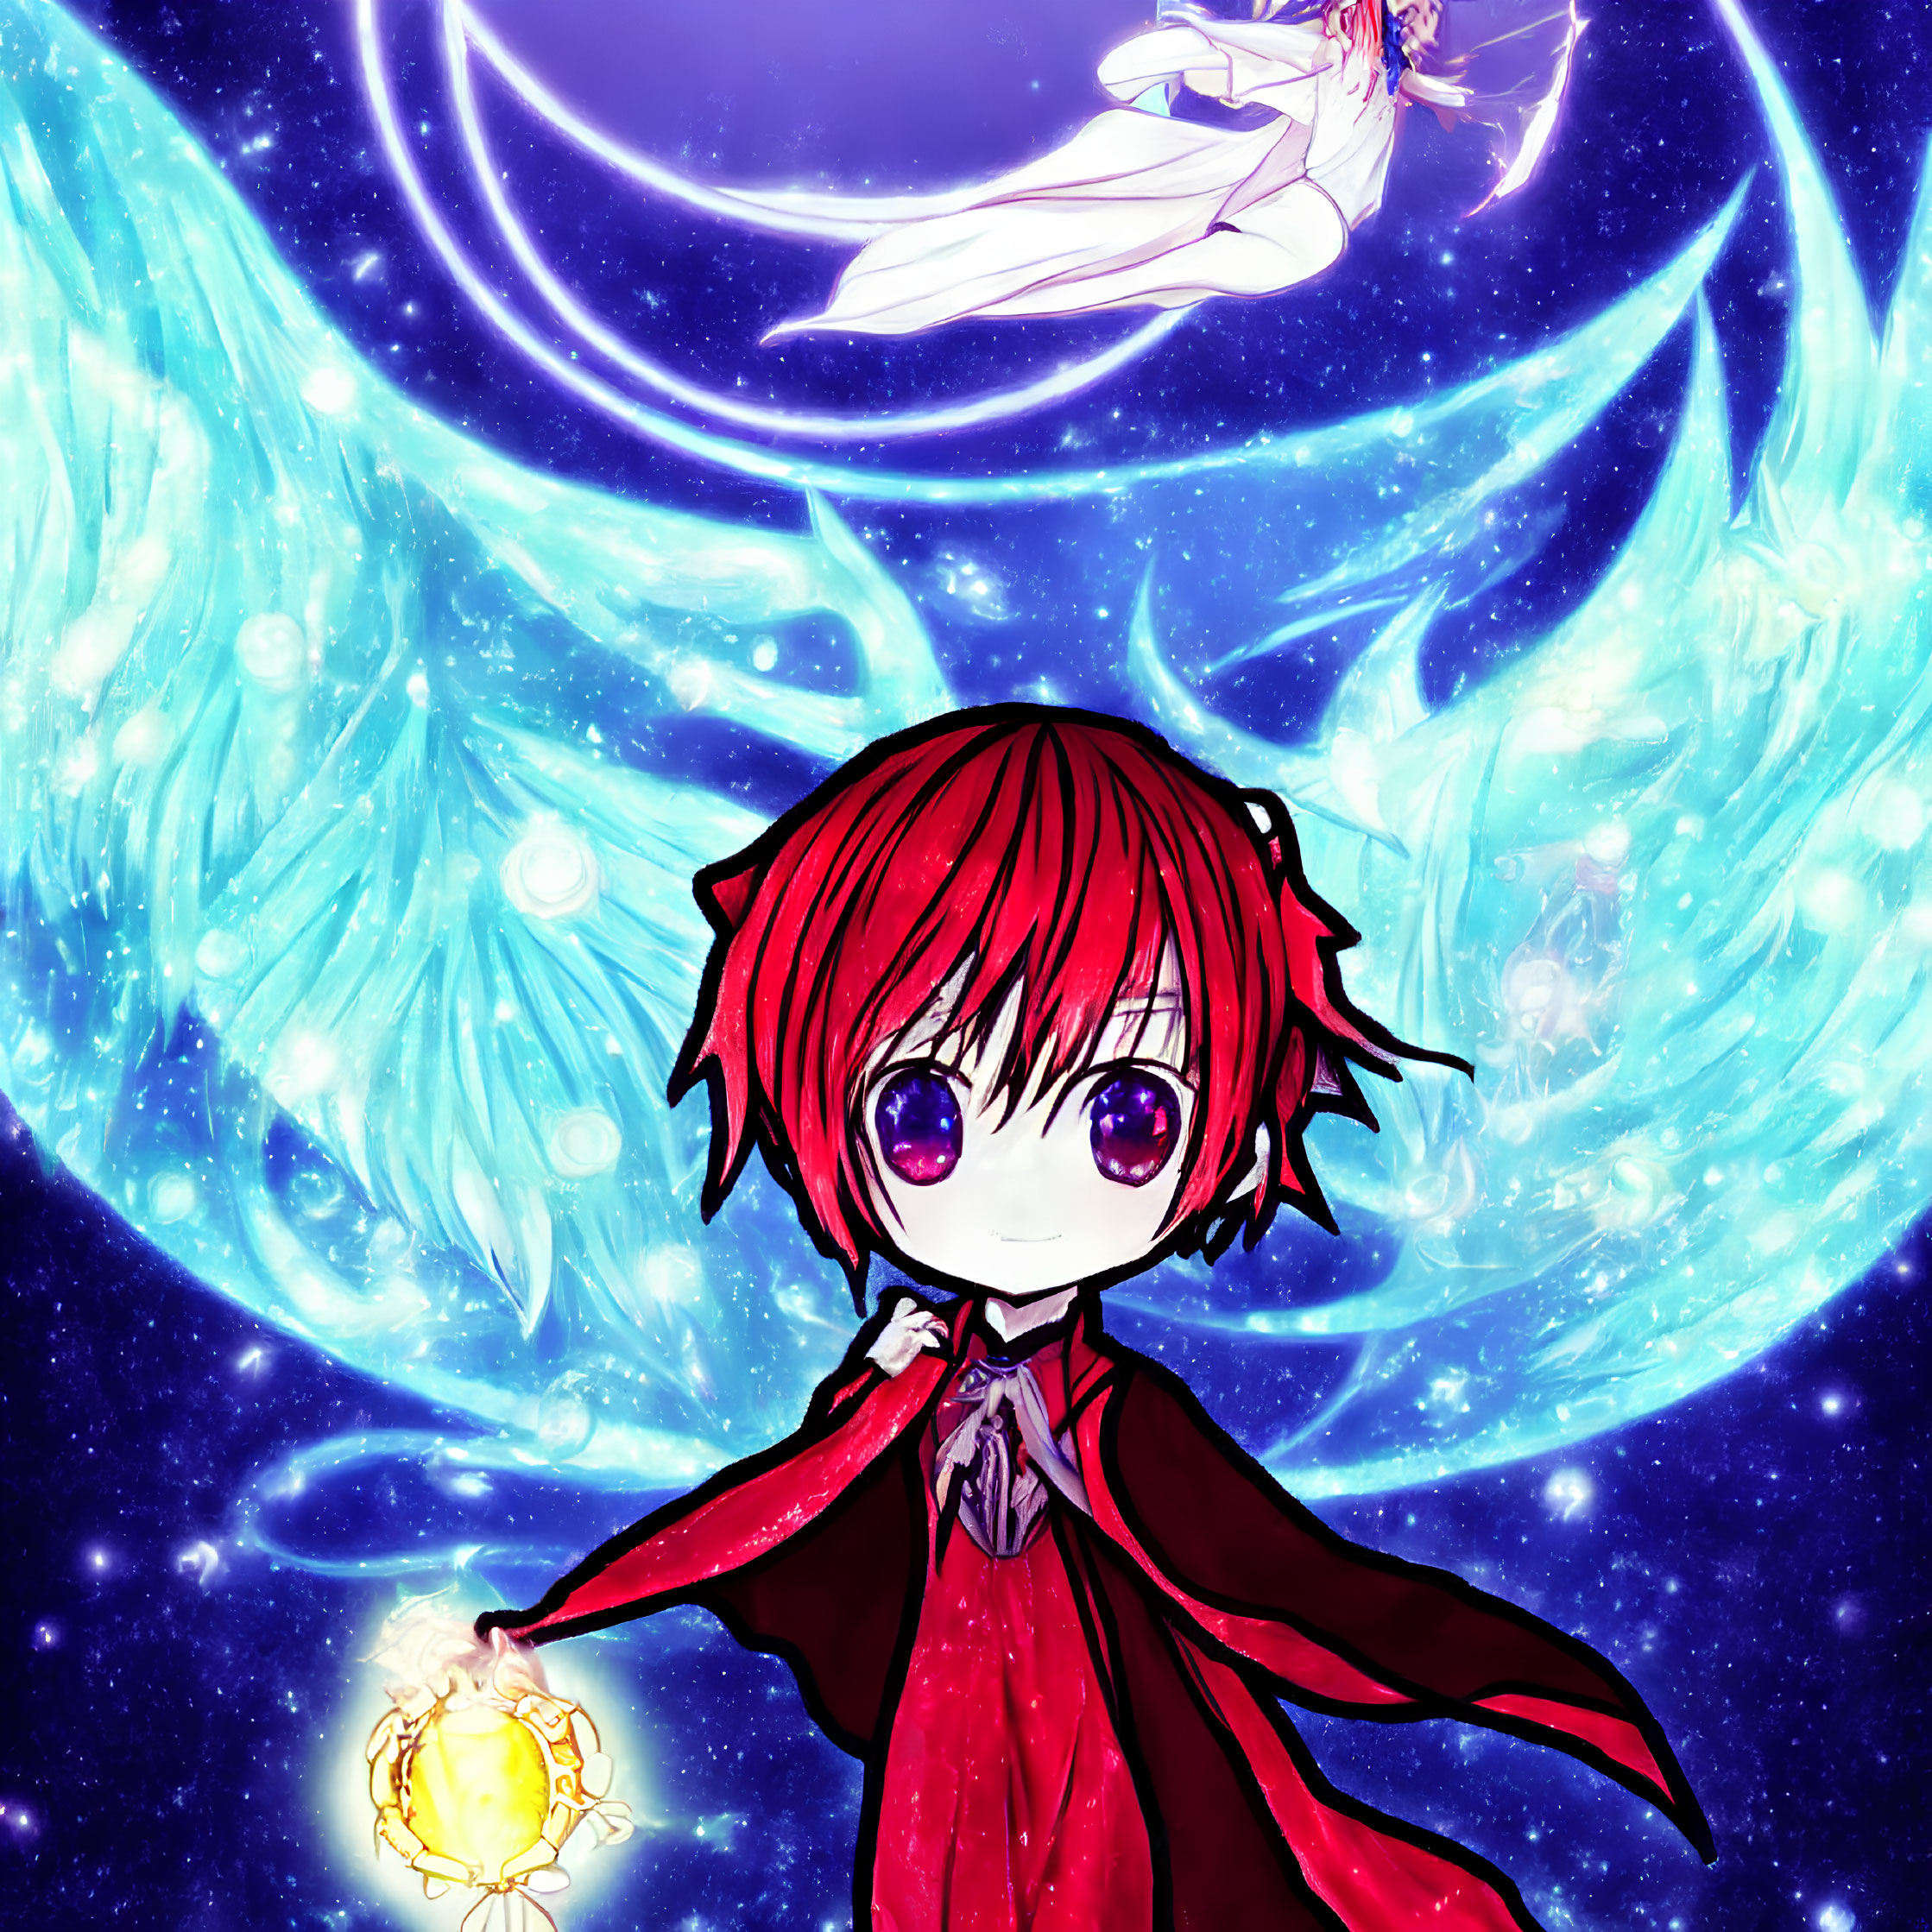 Chibi character with red hair and purple eyes holding glowing orb in digital illustration